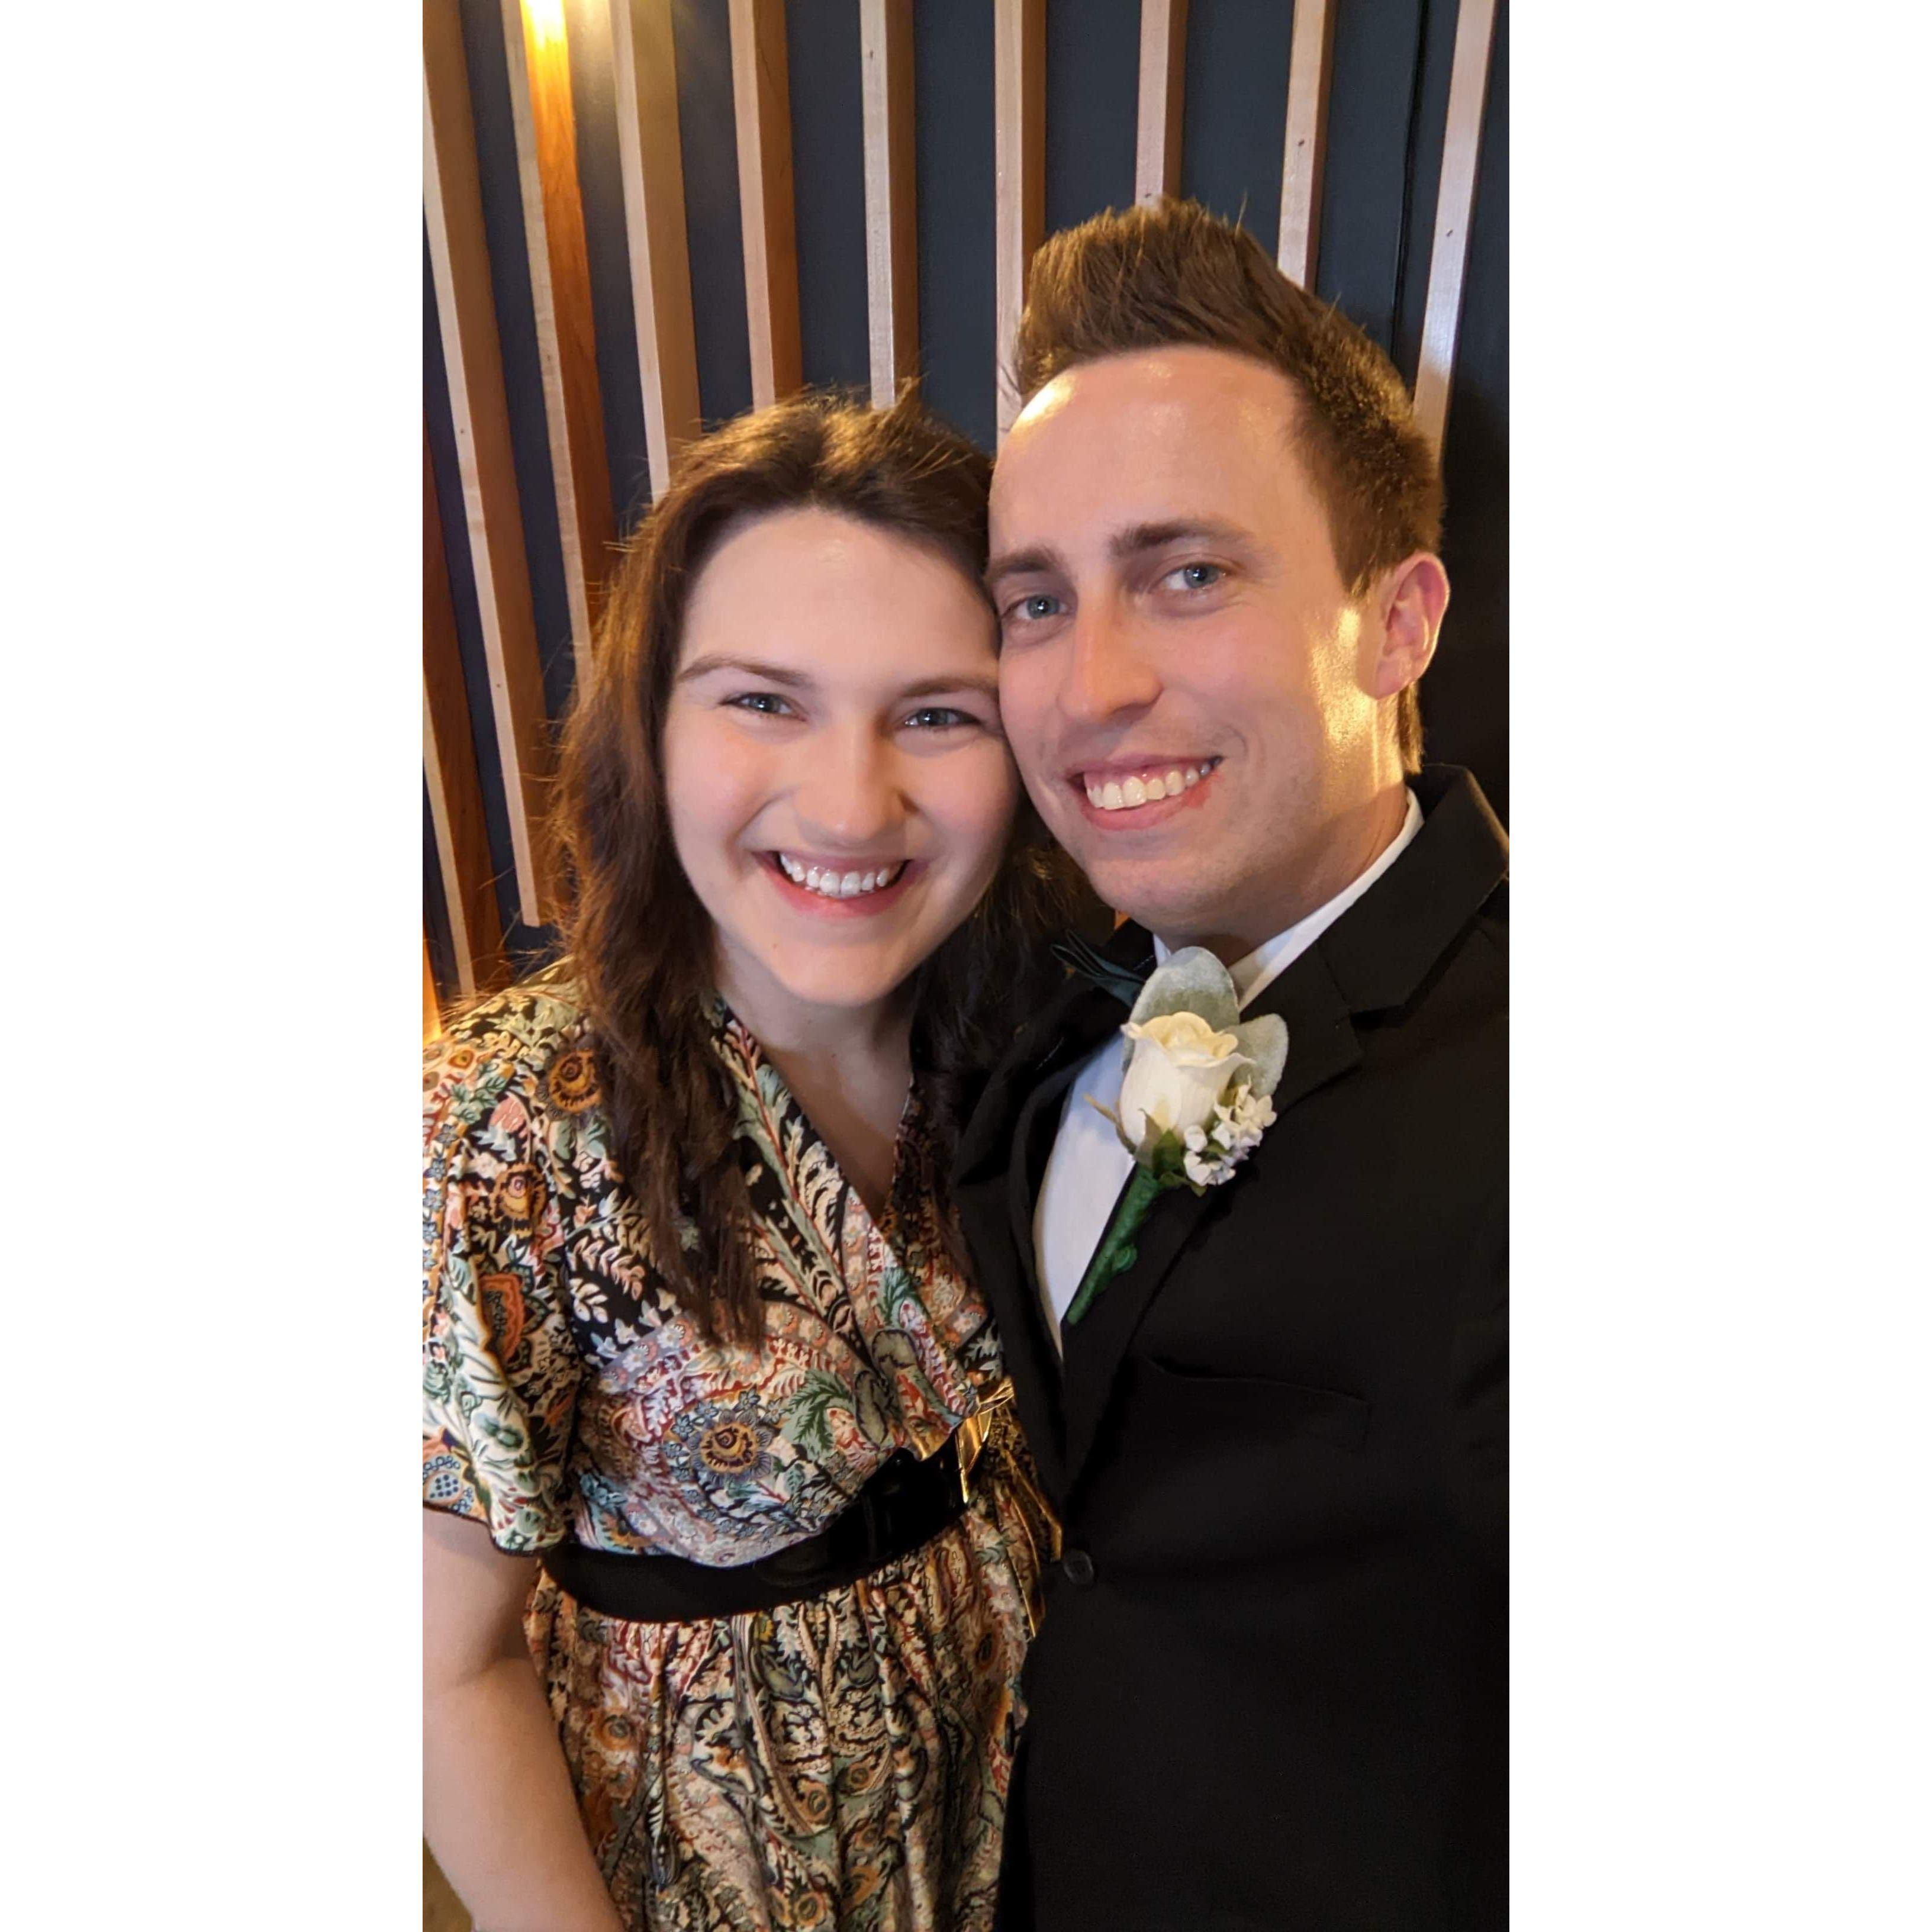 Our first time as each other's wedding date!